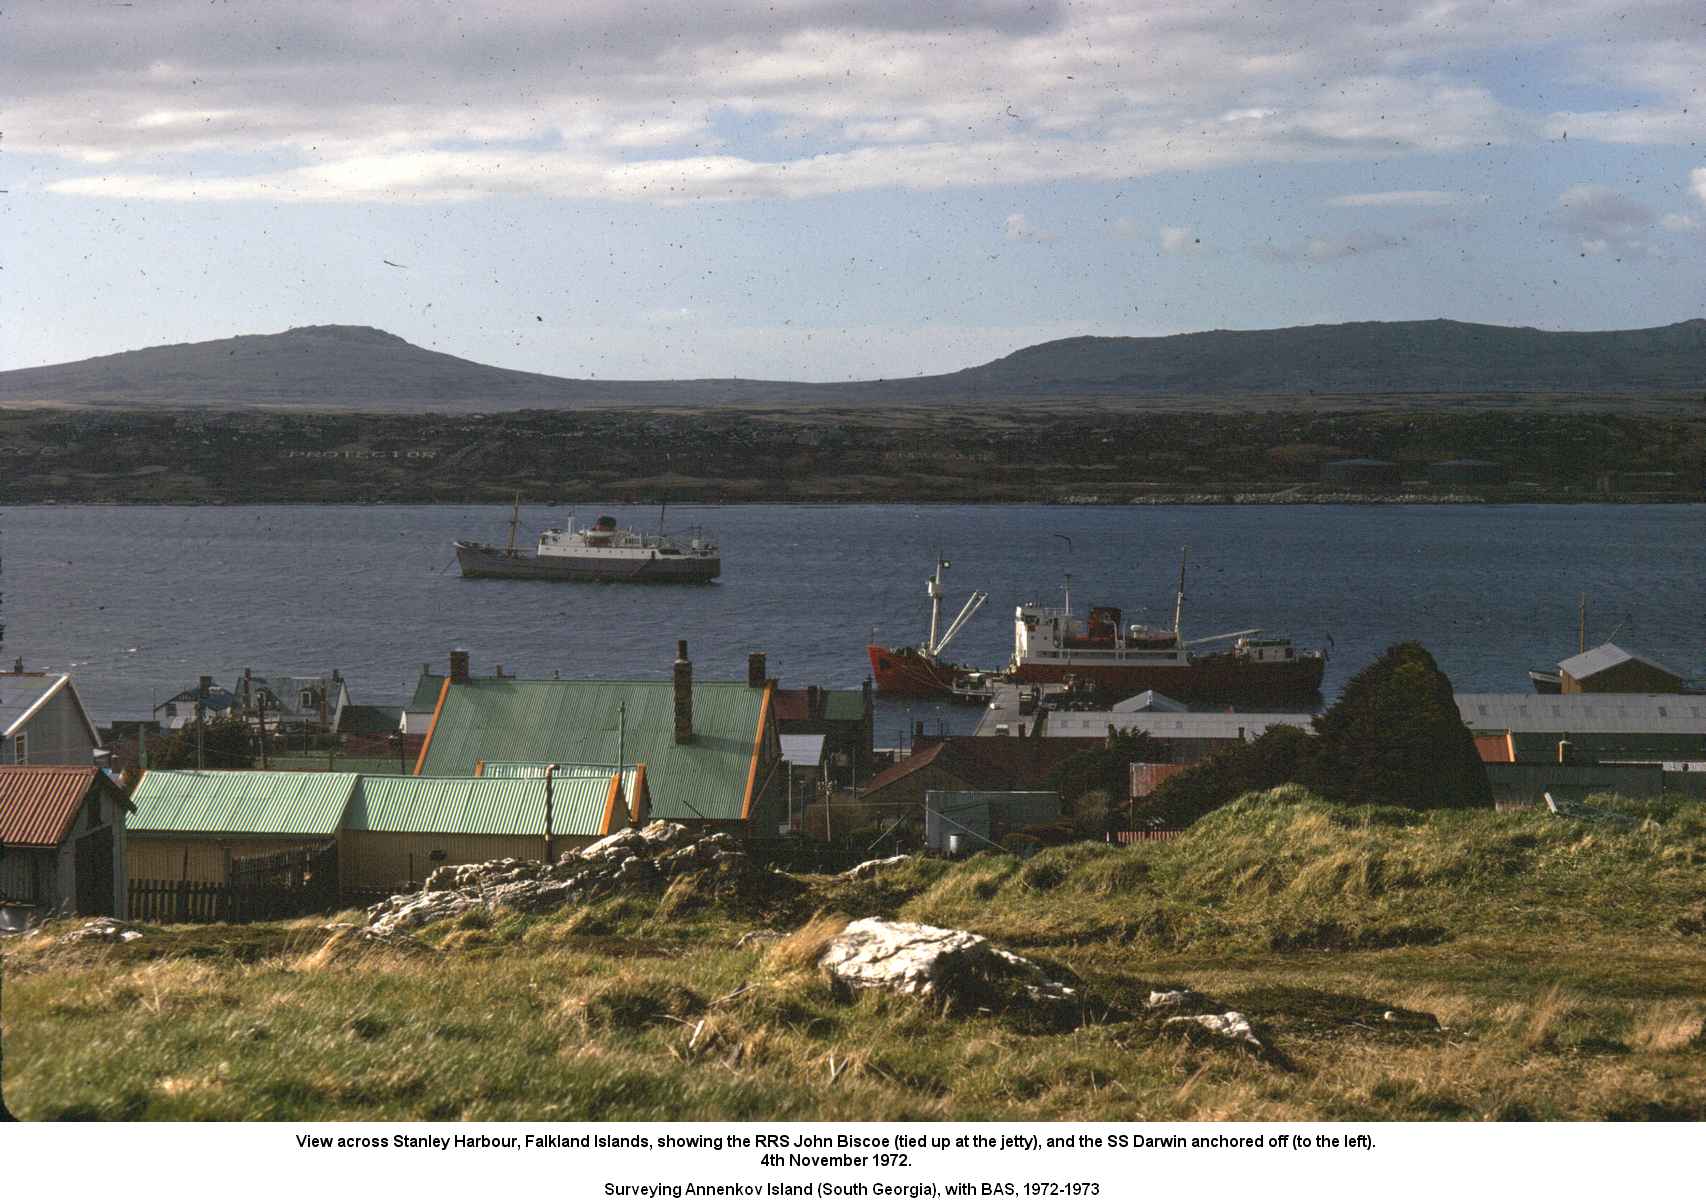 View across Stanley Harbour, Falkland Islands, showing the RRS John Biscoe and the SS Darwin. 4th November 1972.